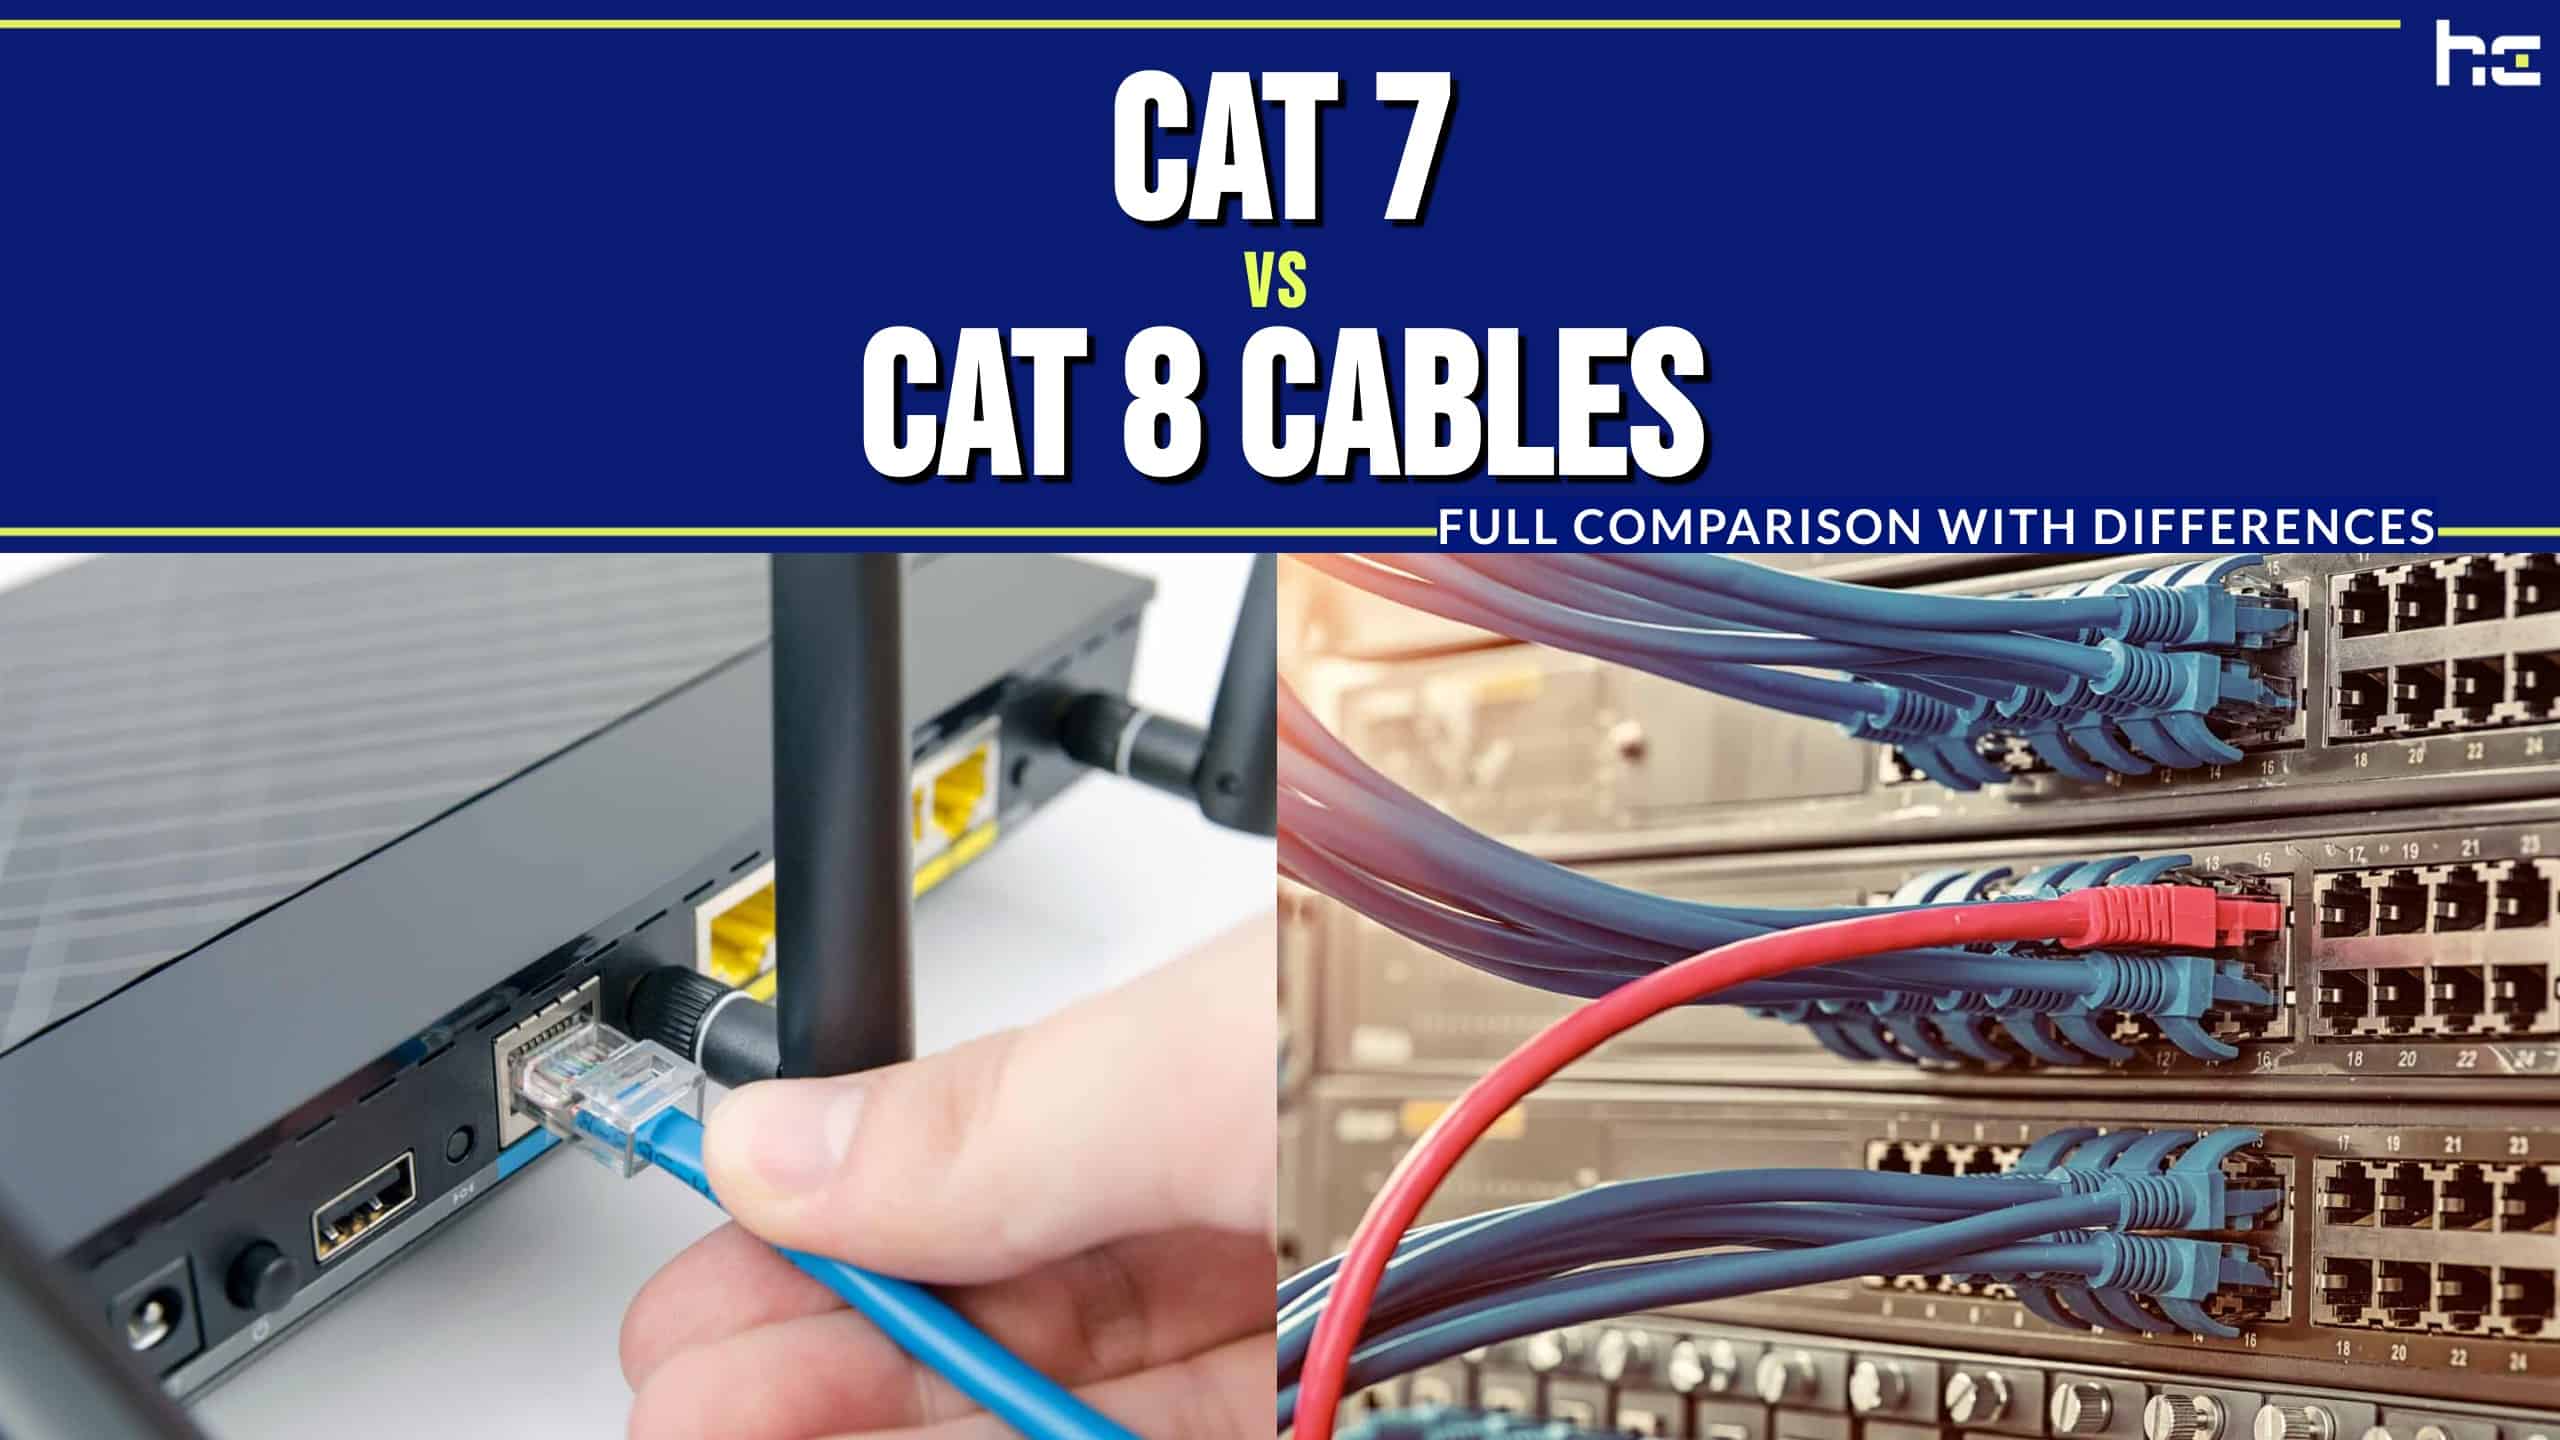 Cat 7 vs. Cat 8 Cables: Full Comparison with Differences - History